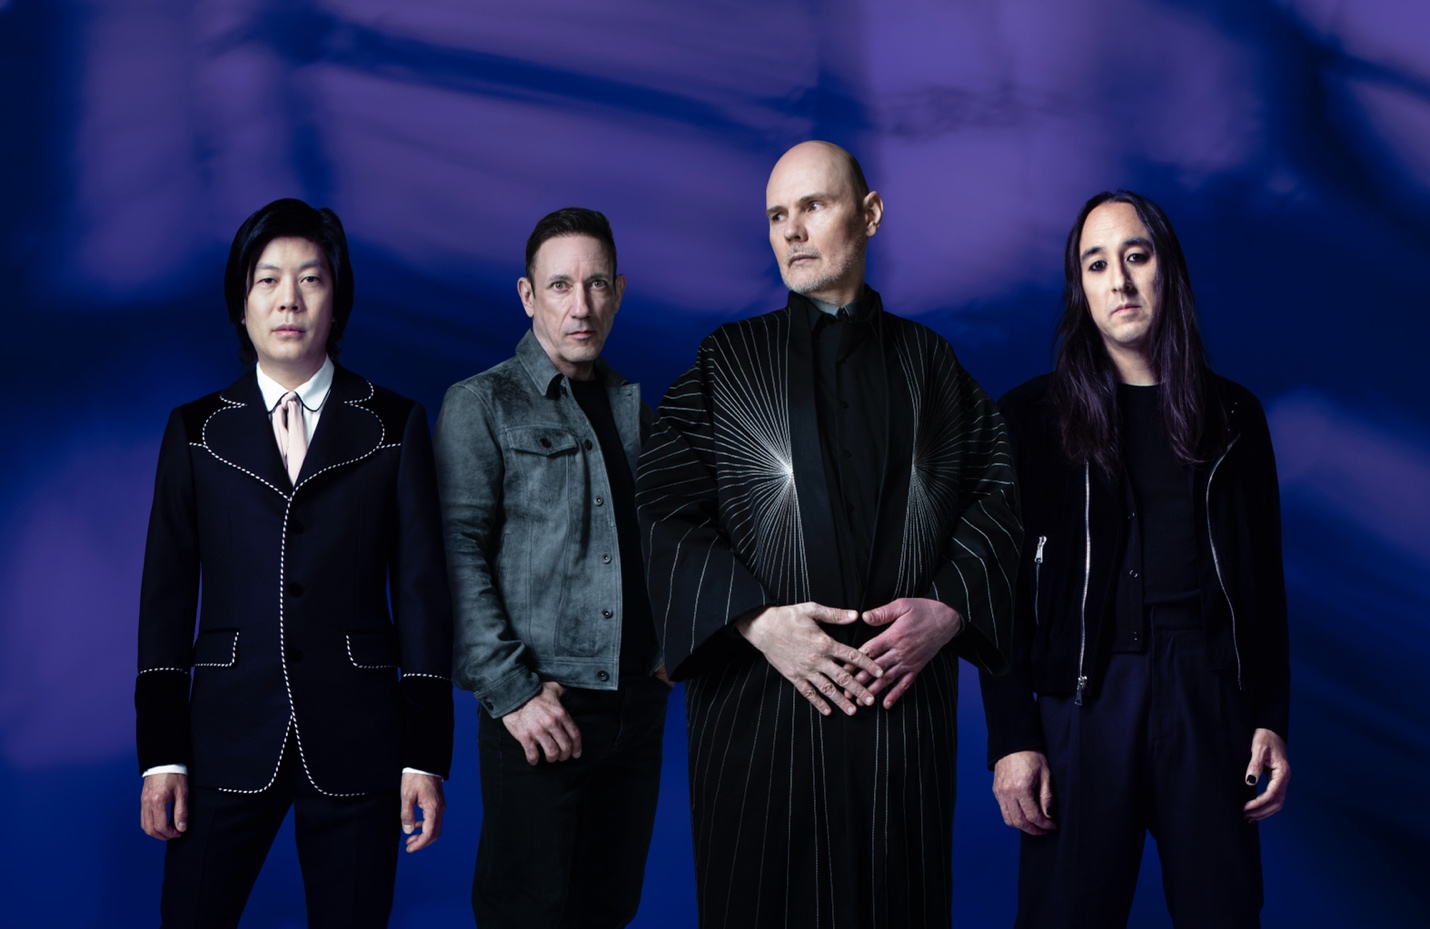 The Smashing Pumpkins Announce Spirits On Fire Tour at Capital One Arena October 18